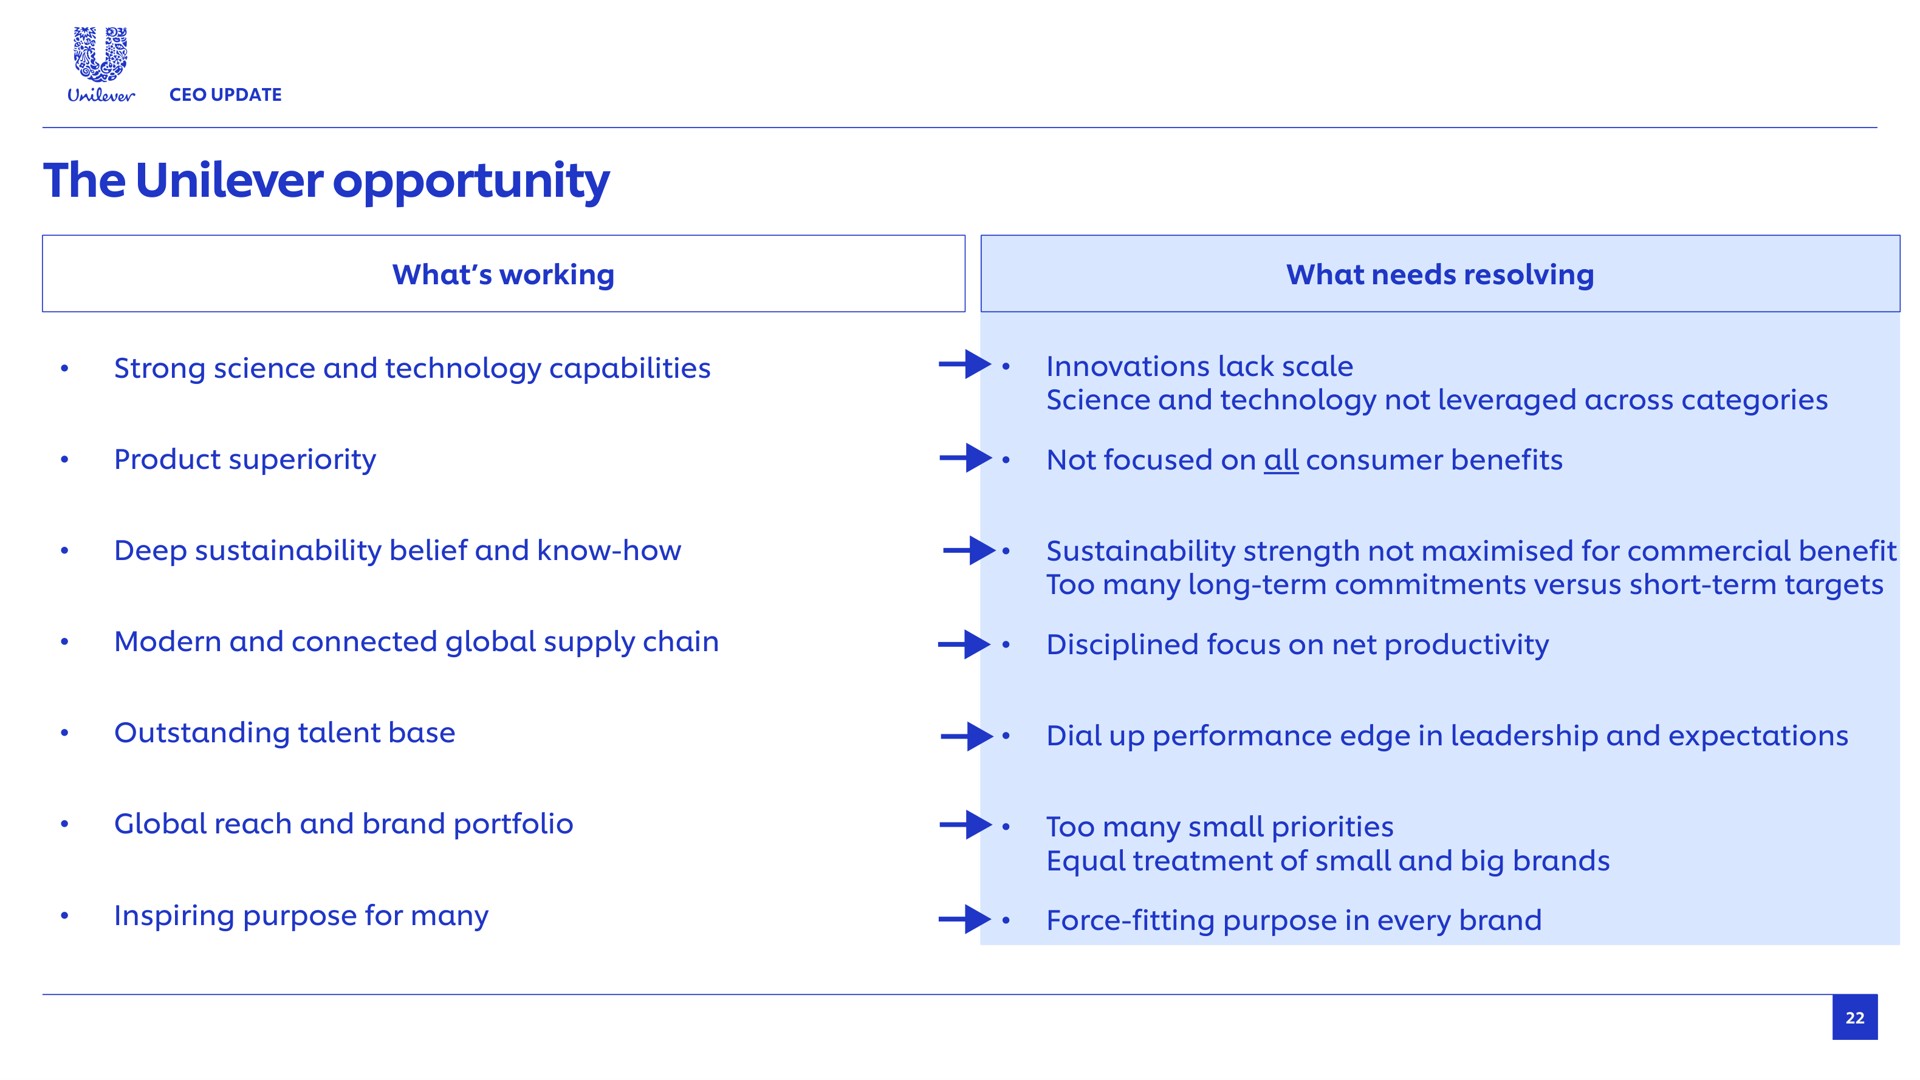 the opportunity by what working what needs resolving strong science and technology capabilities product superiority deep belief and know how modern and connected global supply chain outstanding talent base global reach and brand portfolio inspiring purpose for many science and technology not leveraged across categories not focused on all consumer benefits strength not for commercial benefit too many long term commitments versus short term targets disciplined focus on net productivity dial up performance edge in leadership and expectations innovations lack scale too many small priorities equal treatment of small and big brands force fitting purpose in every brand | Unilever